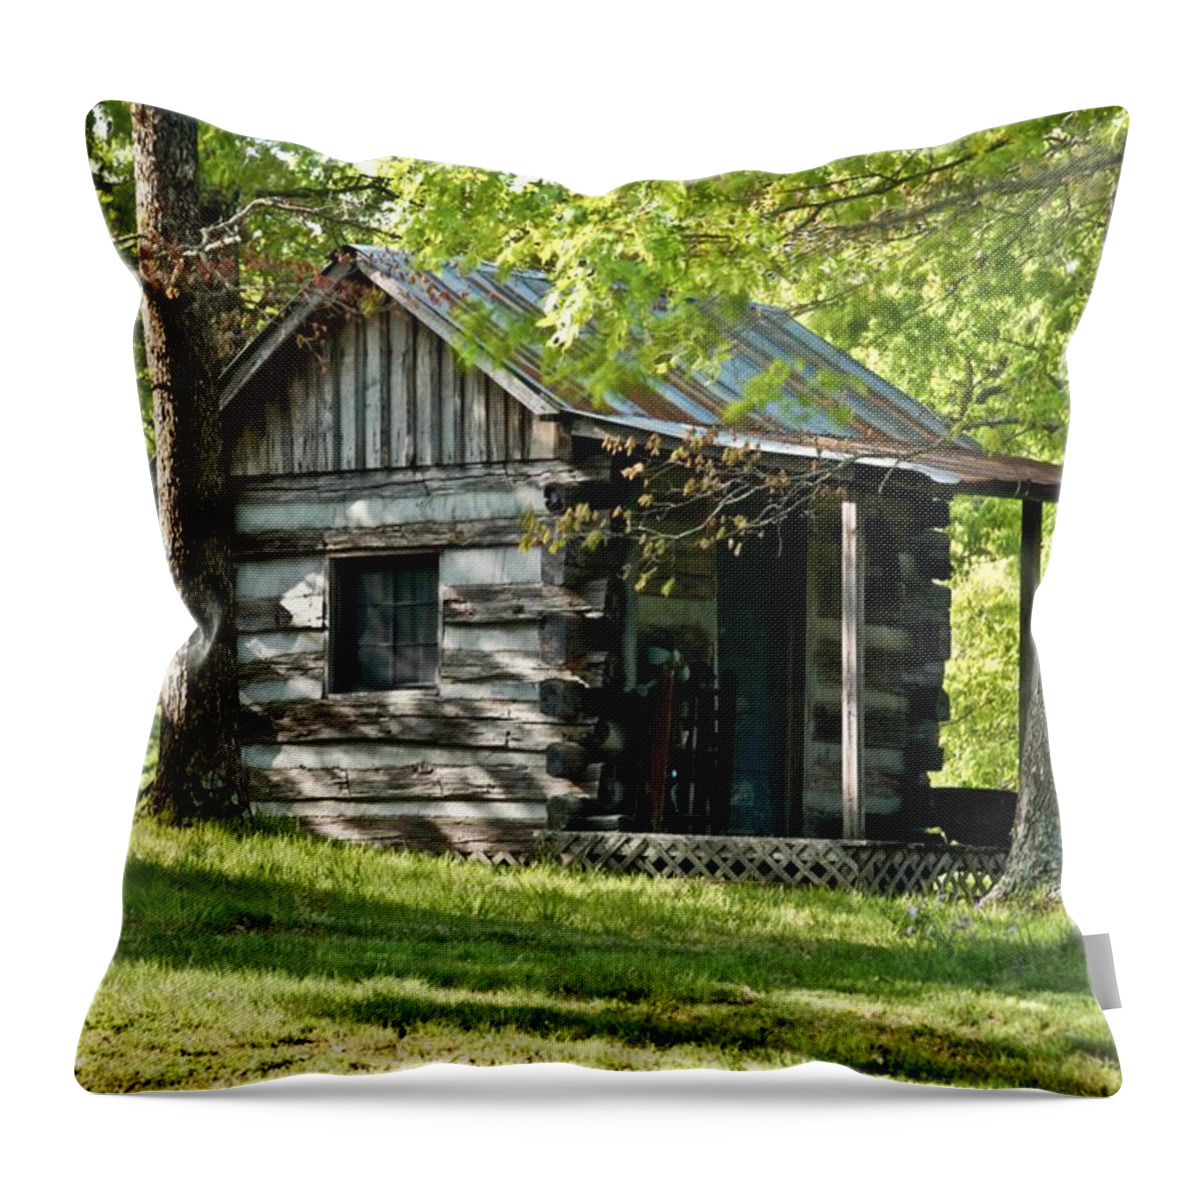 Woodland Throw Pillow featuring the photograph Woodland Cabin 2 by Douglas Barnett